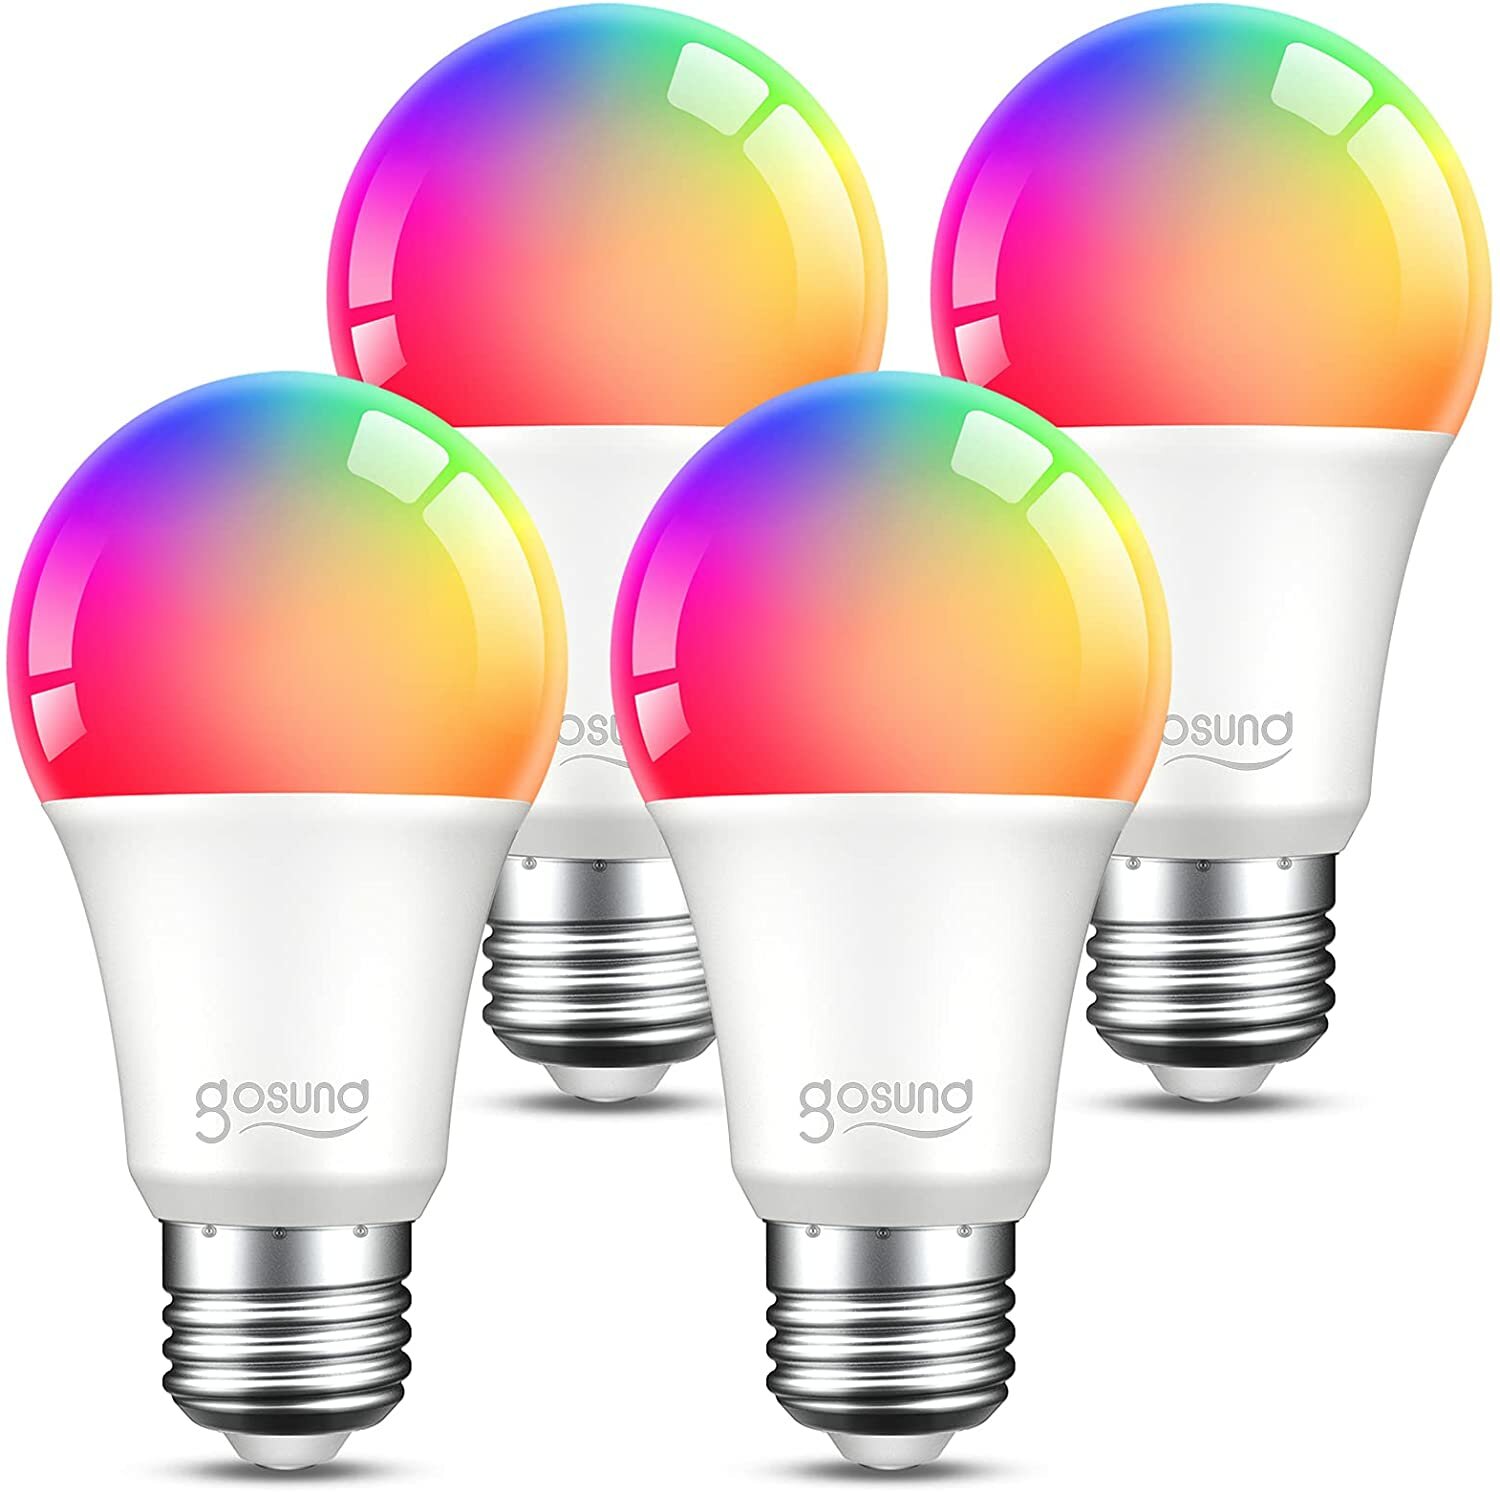 

Gosund Smart Light Bulbs E27 Color Changing Dimmable RGB Multicolor+Warm LED Light Wifi 2.4GHz Remote Control Voice Cont